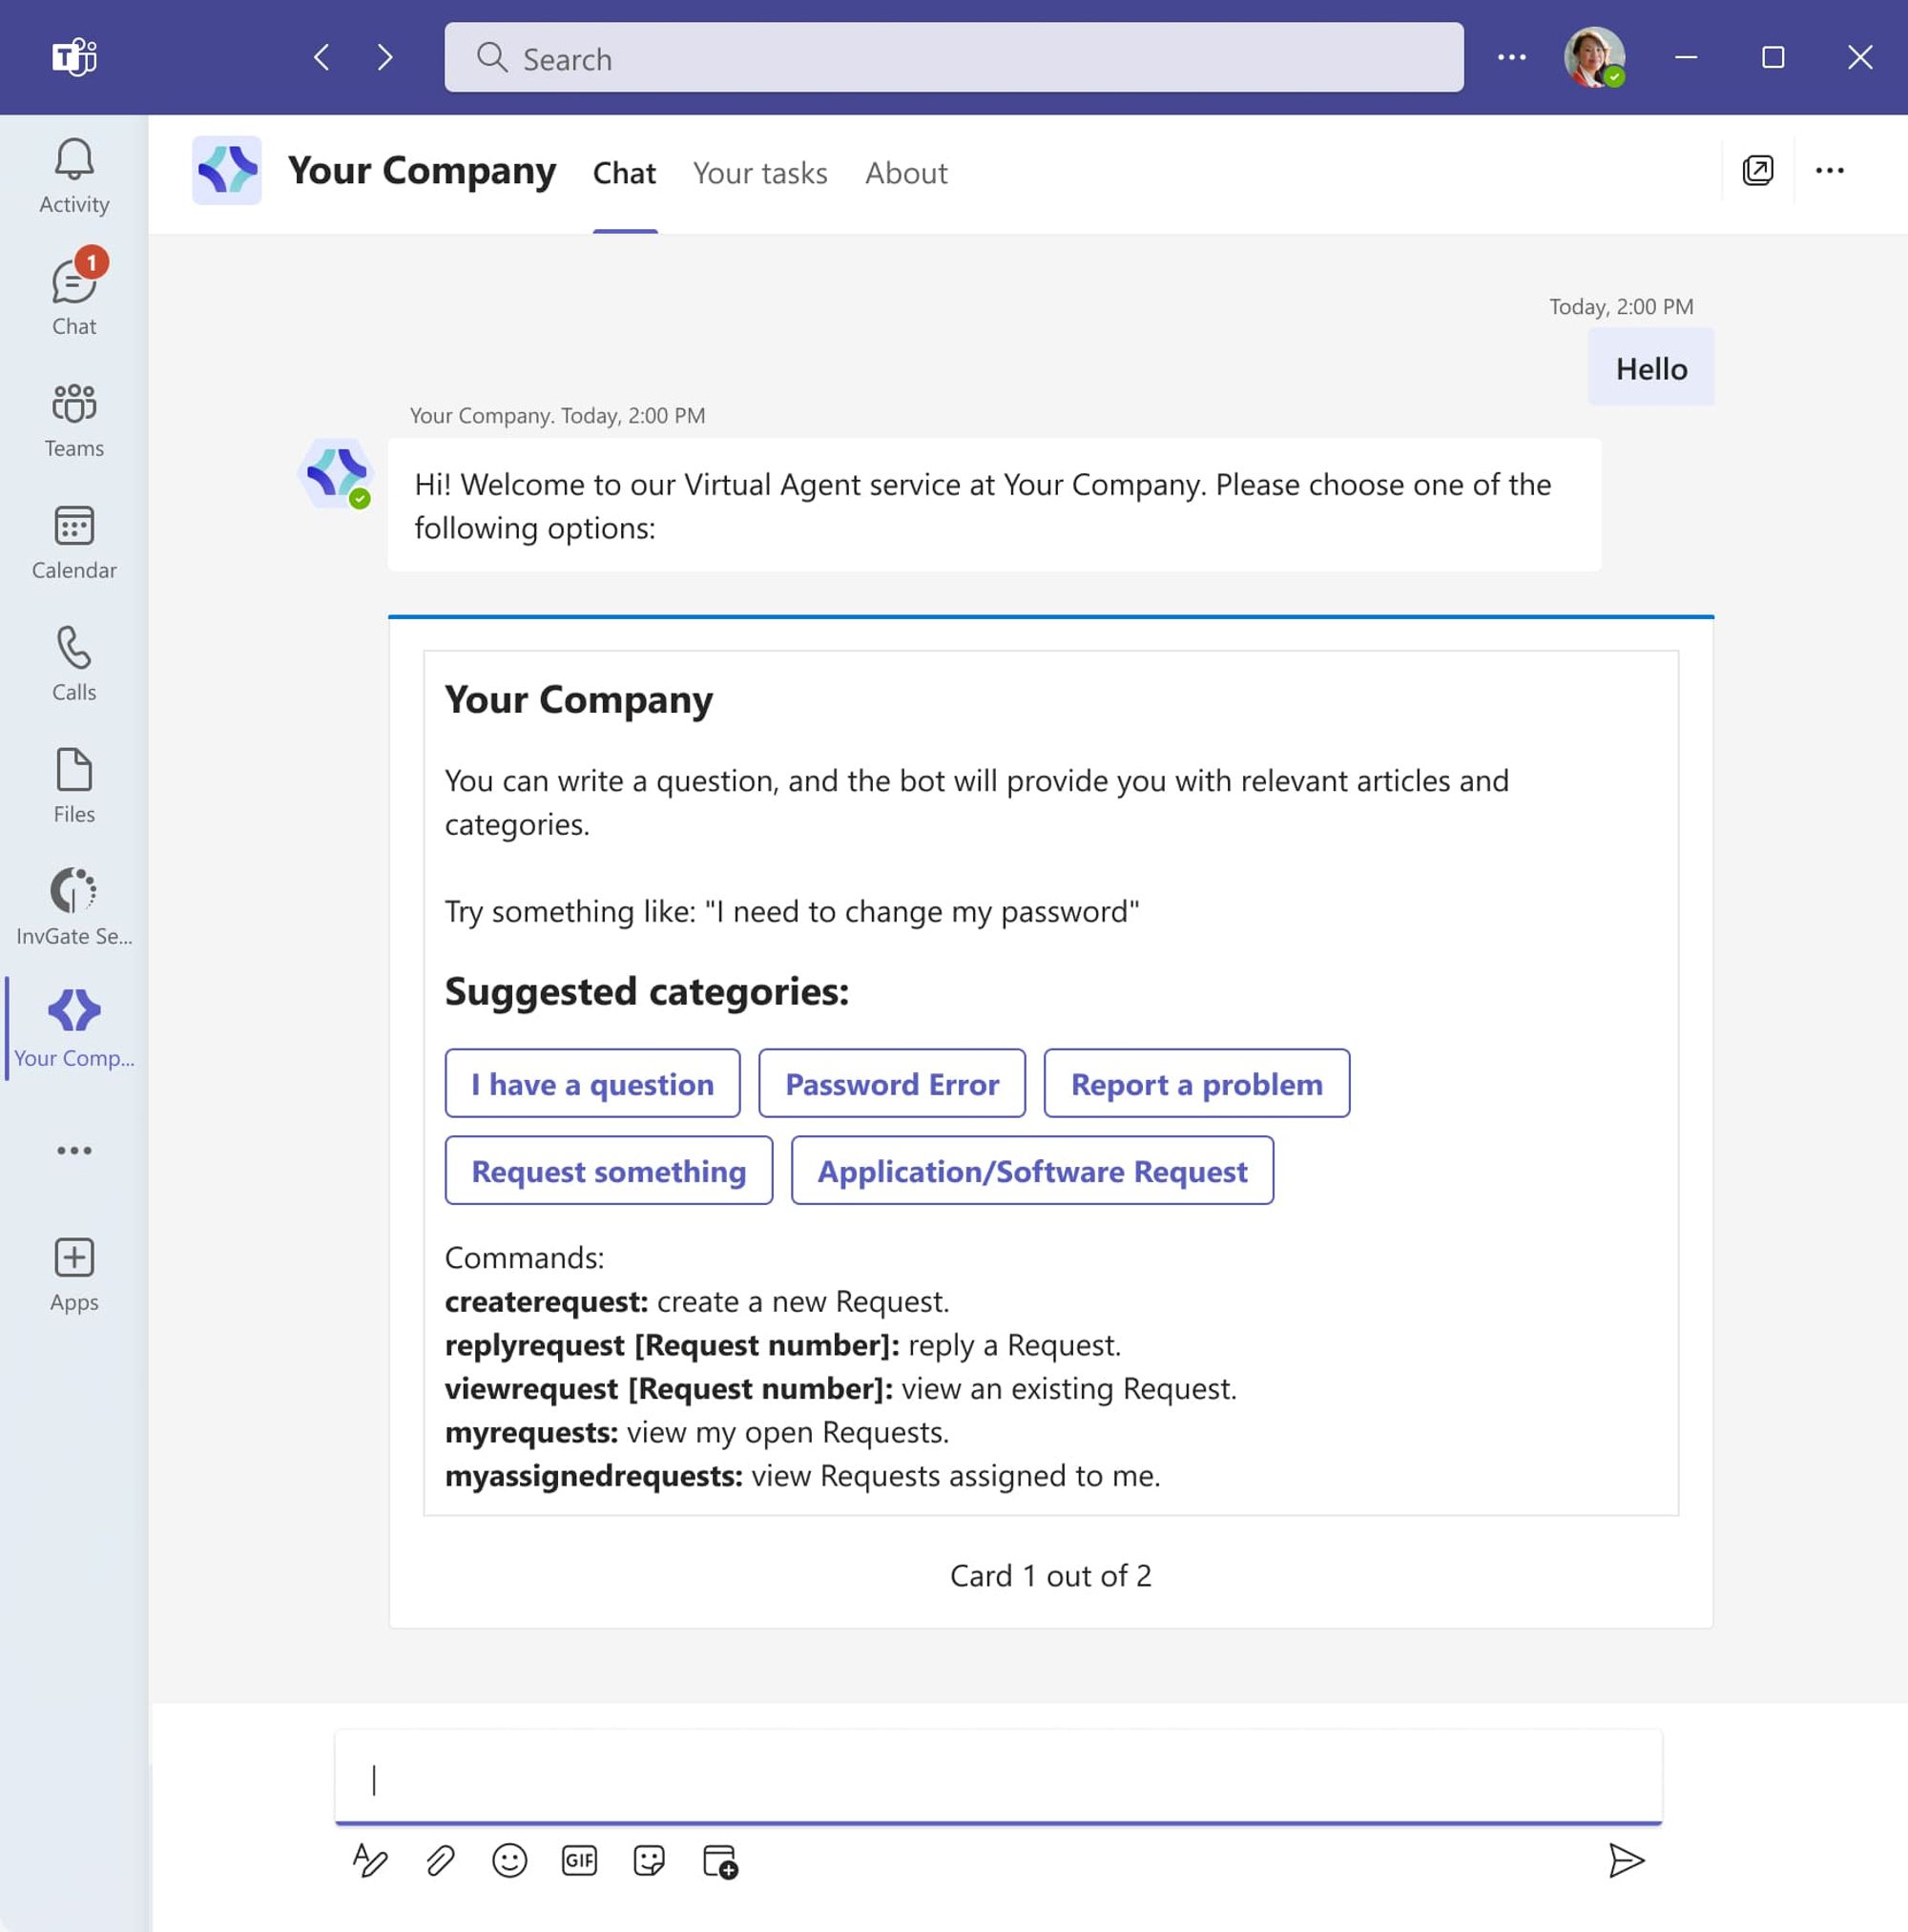 The InvGate Service Desk and Microsoft Teams integration leverages our Virtual Agent and provides you with AI capabilities.